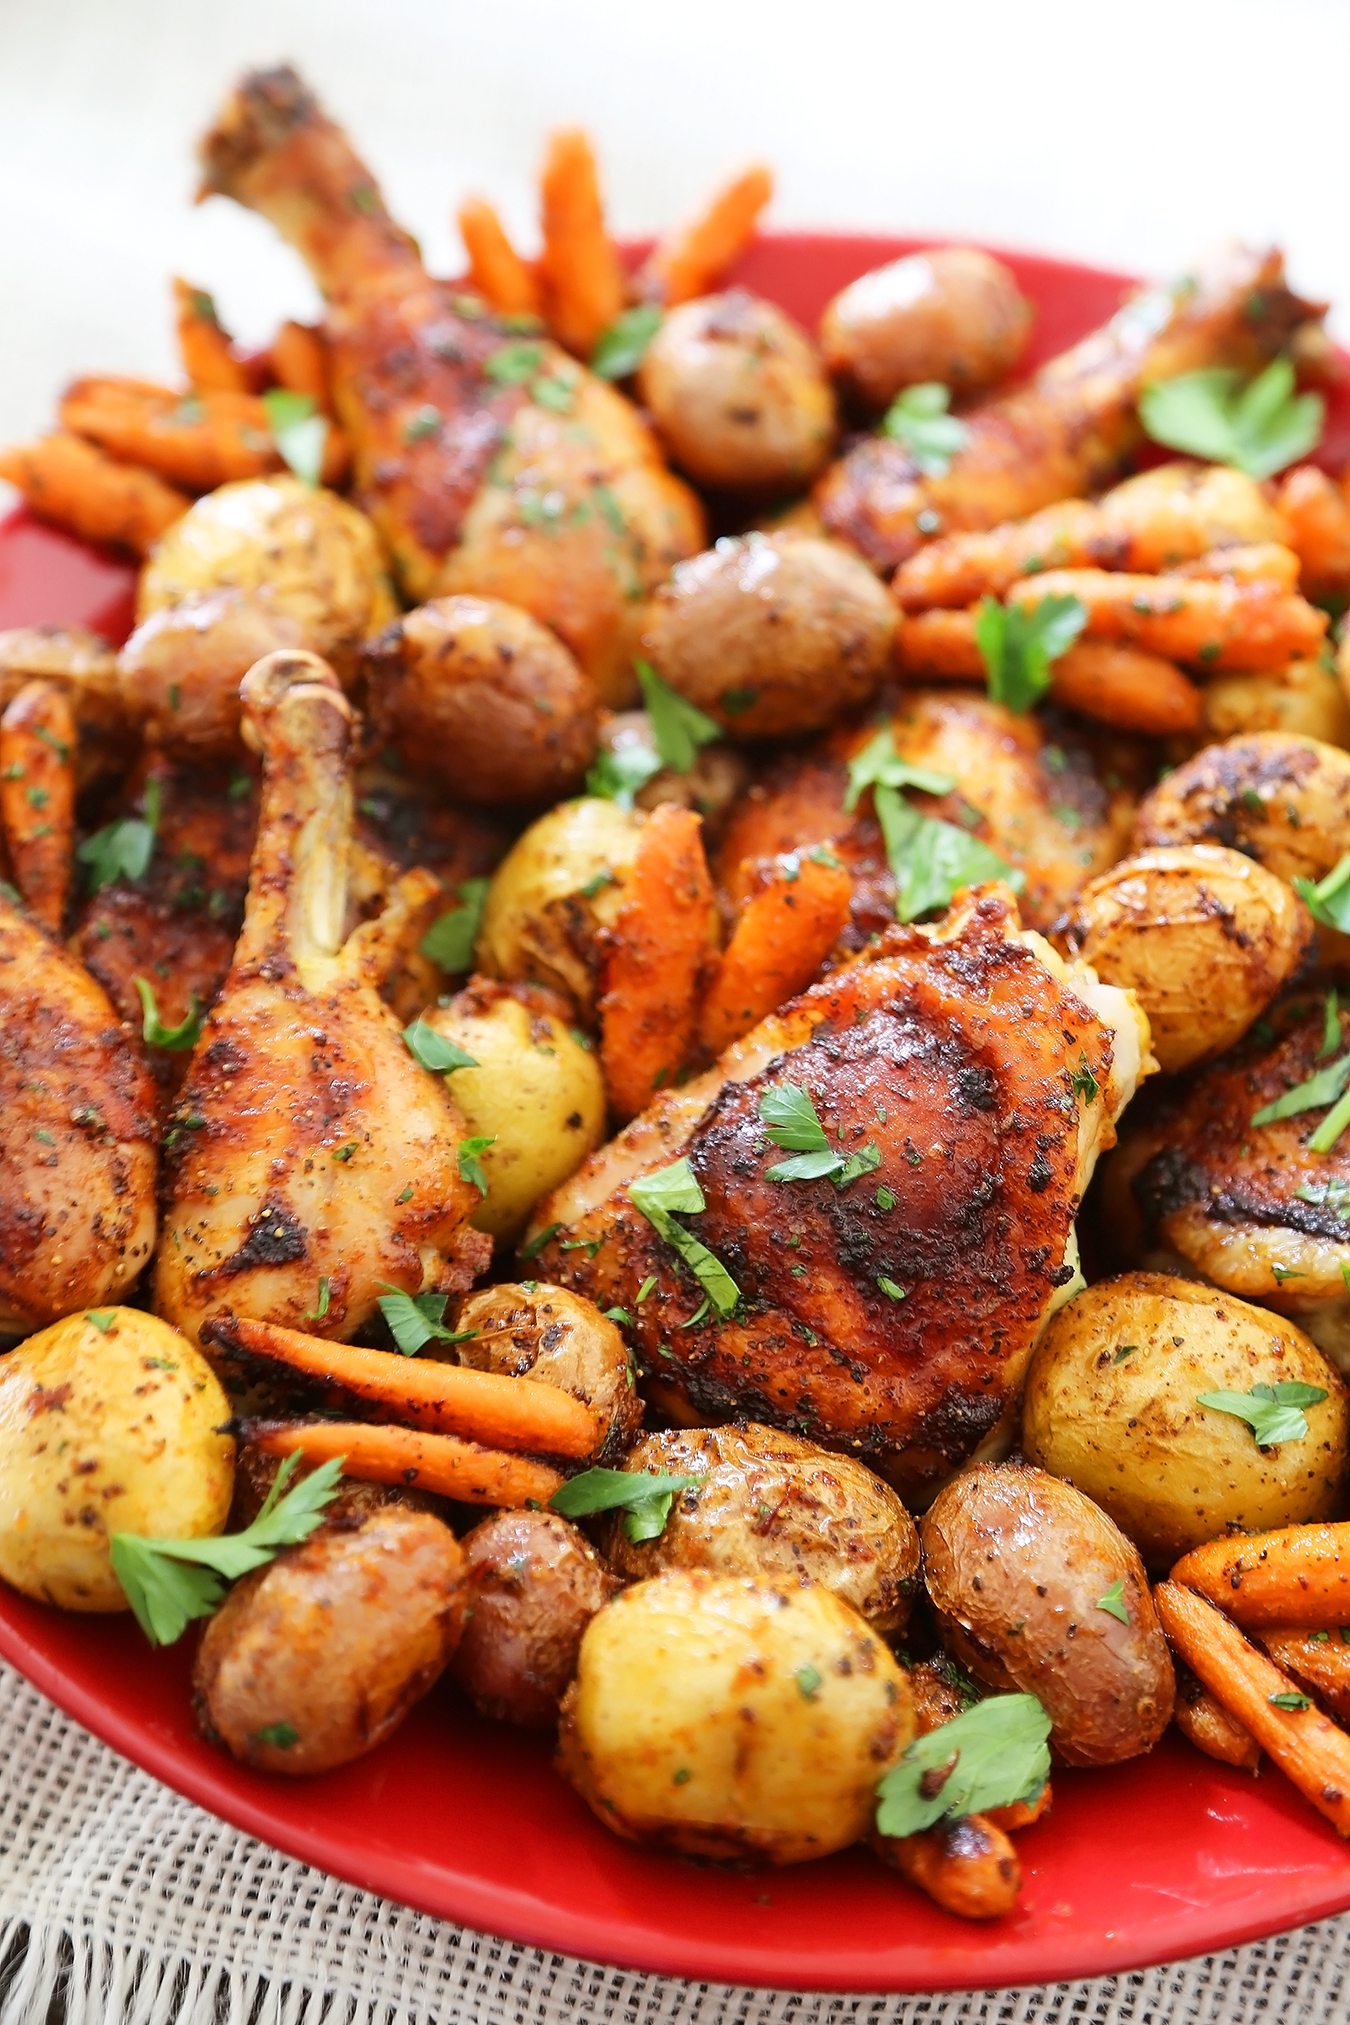 Chili-Garlic Roasted Chicken with Potatoes & Carrots - Spicy, crispy roasted chicken with tender potatoes and carrots! Just 1 pan + easy ingredients needed. So elegant and easy! Thecomfortofcooking.com